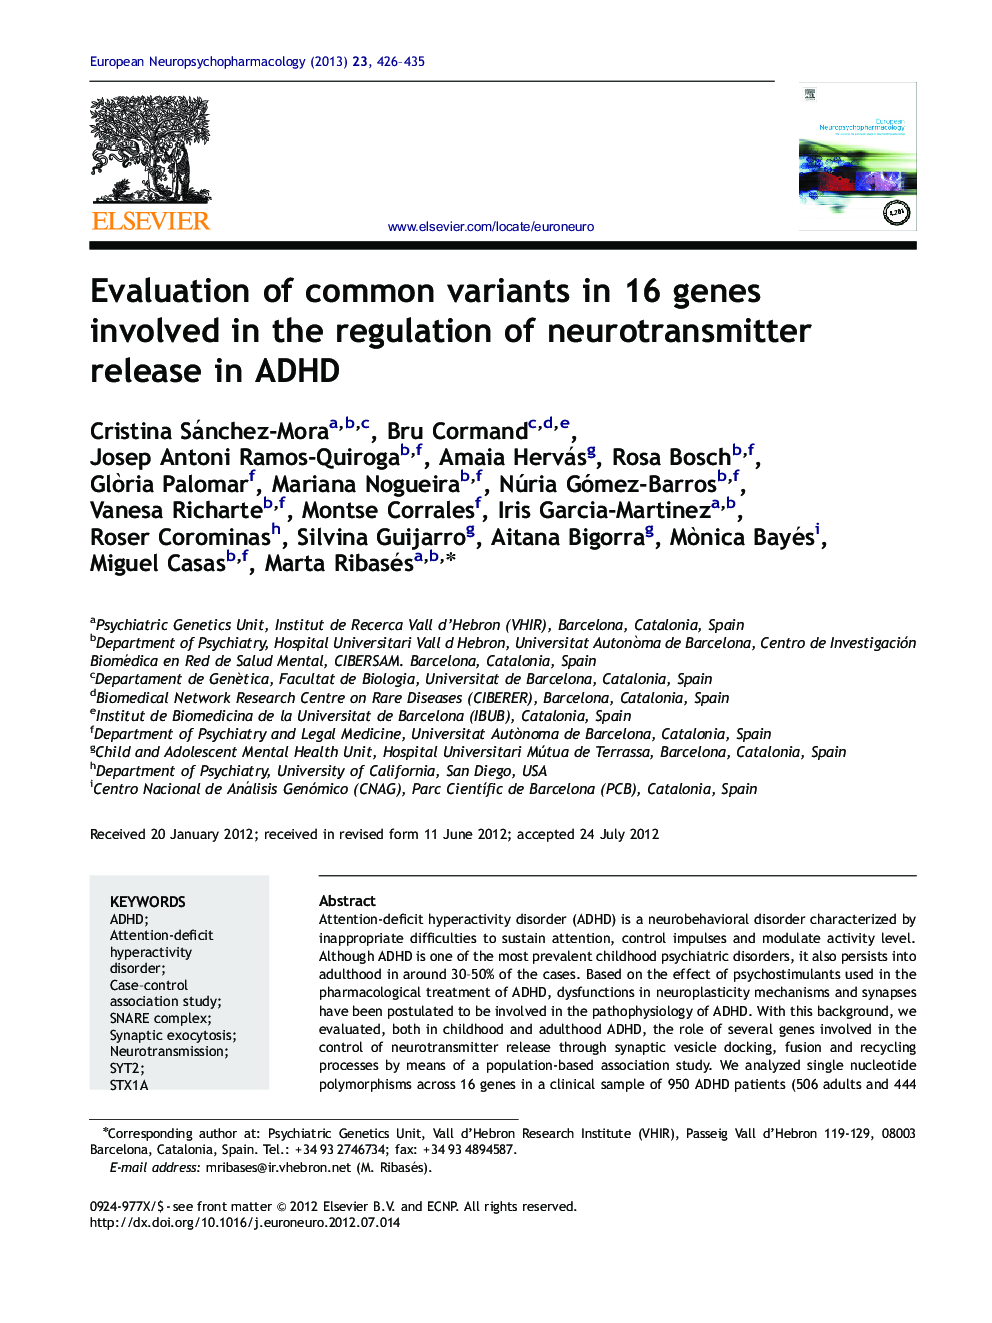 Evaluation of common variants in 16 genes involved in the regulation of neurotransmitter release in ADHD